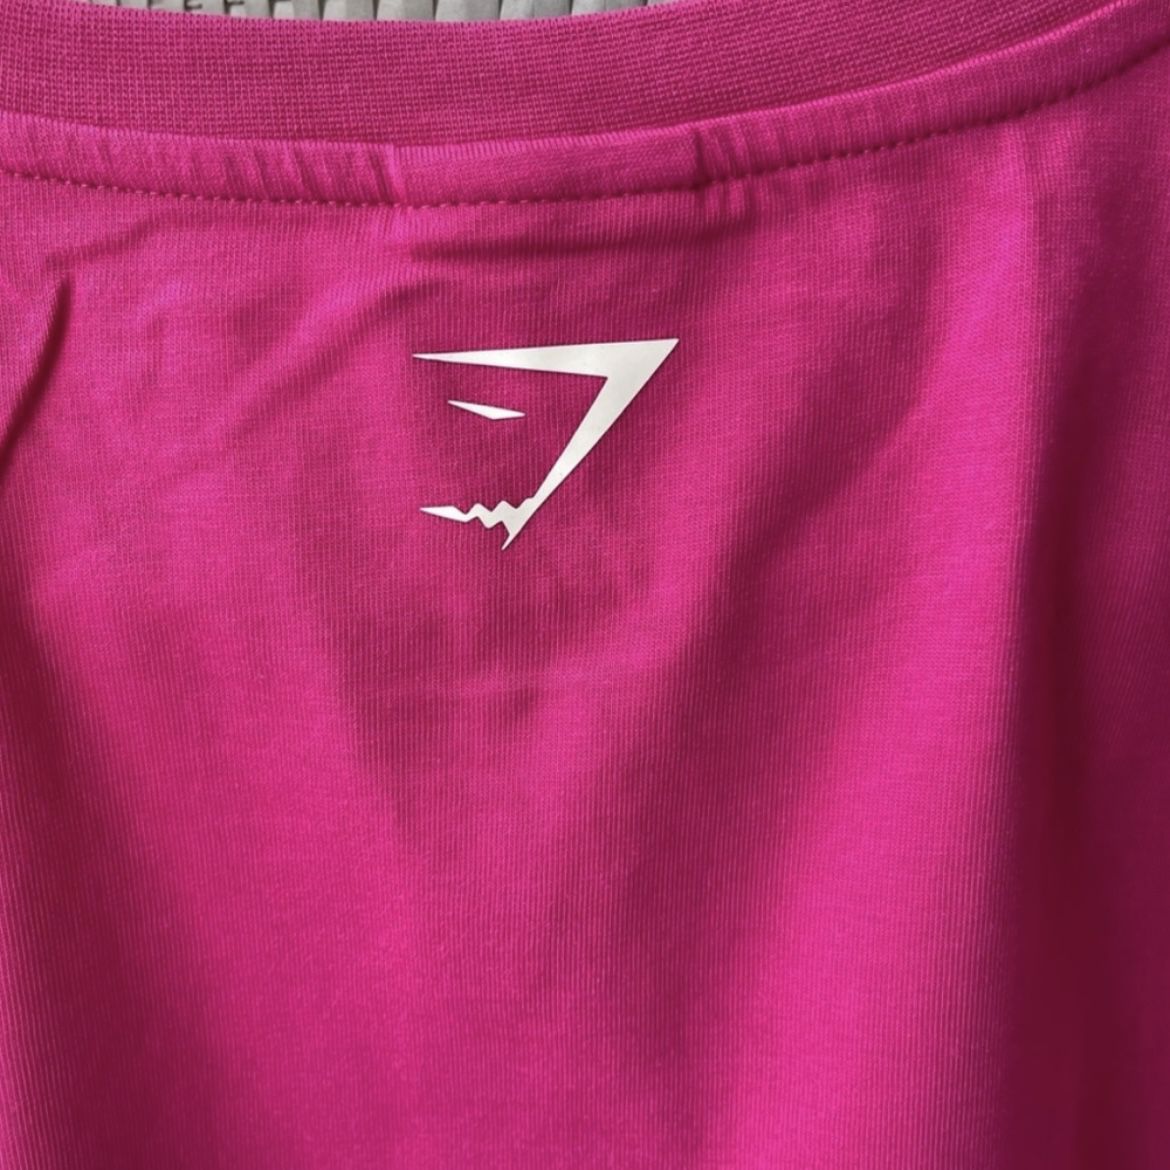 GYMSHARK cropped top short sleeves athletic women's Size Medium for Sale in  Vancouver, WA - OfferUp